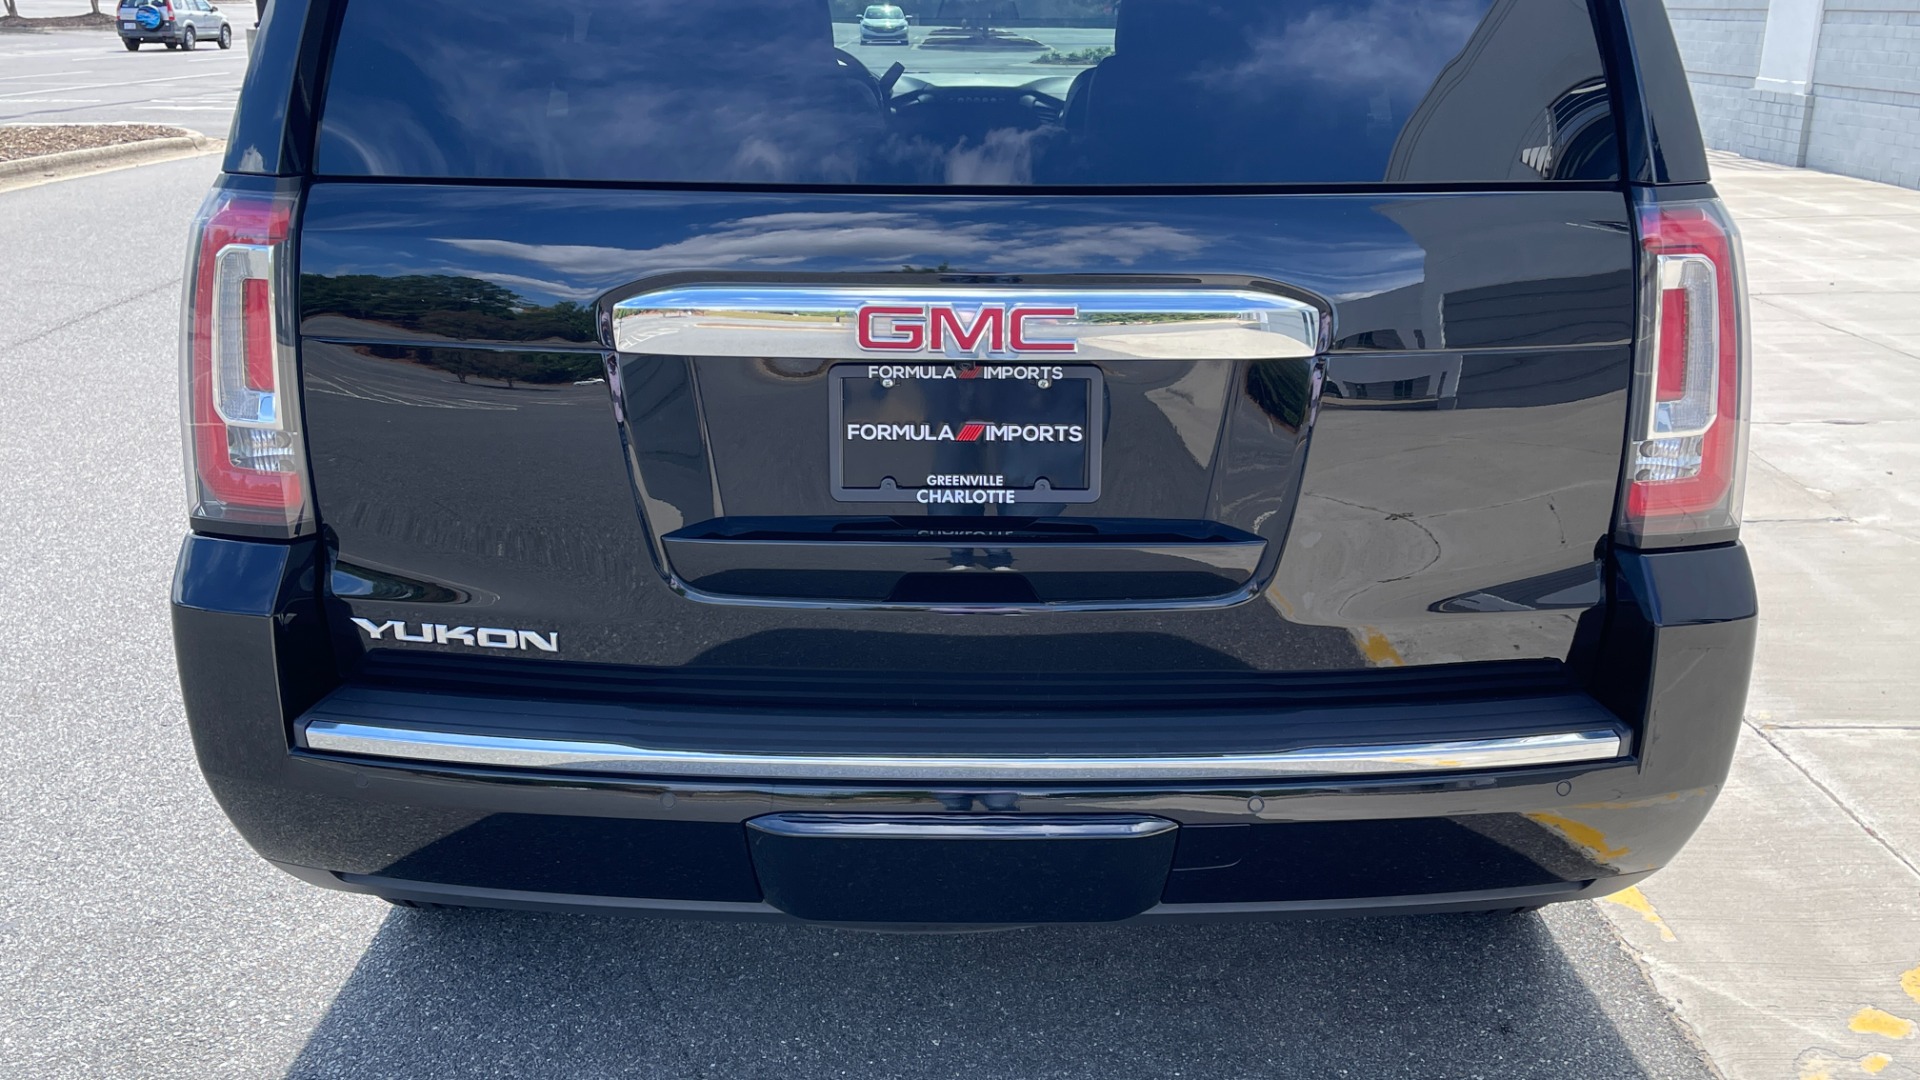 Used 2019 GMC Yukon DENALI / ULTIMATE PACKAGE / DVD / 4X4 / ADAPTIVE CRUISE / SUNROOF for sale $58,295 at Formula Imports in Charlotte NC 28227 45